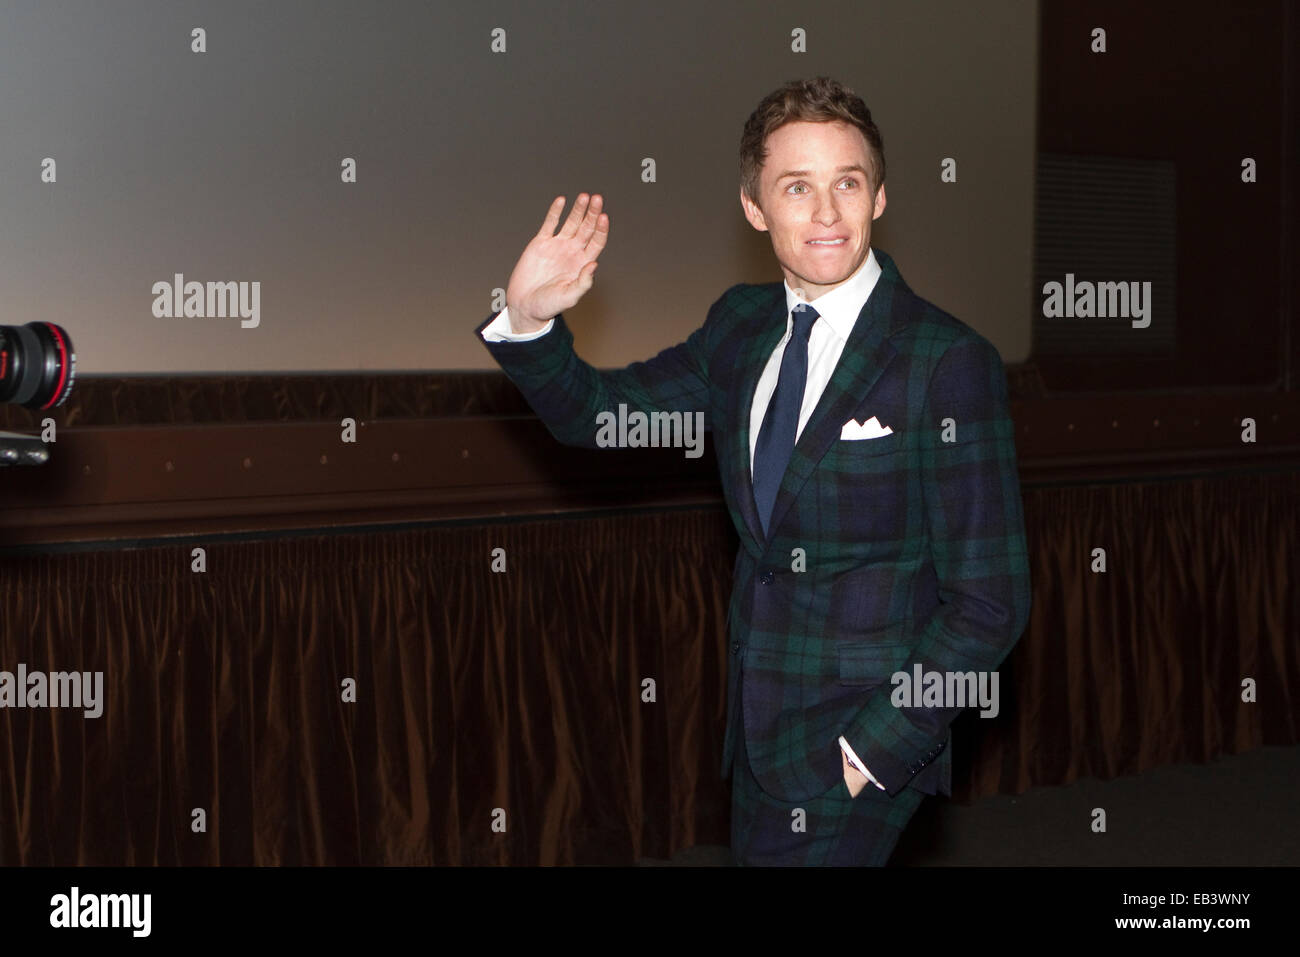 Torino, Italy, 25th November 2014. English actor Eddie Redmayne receives an award during Torino Film Festival for his performance in the movie 'The Theory of Everything'. Stock Photo